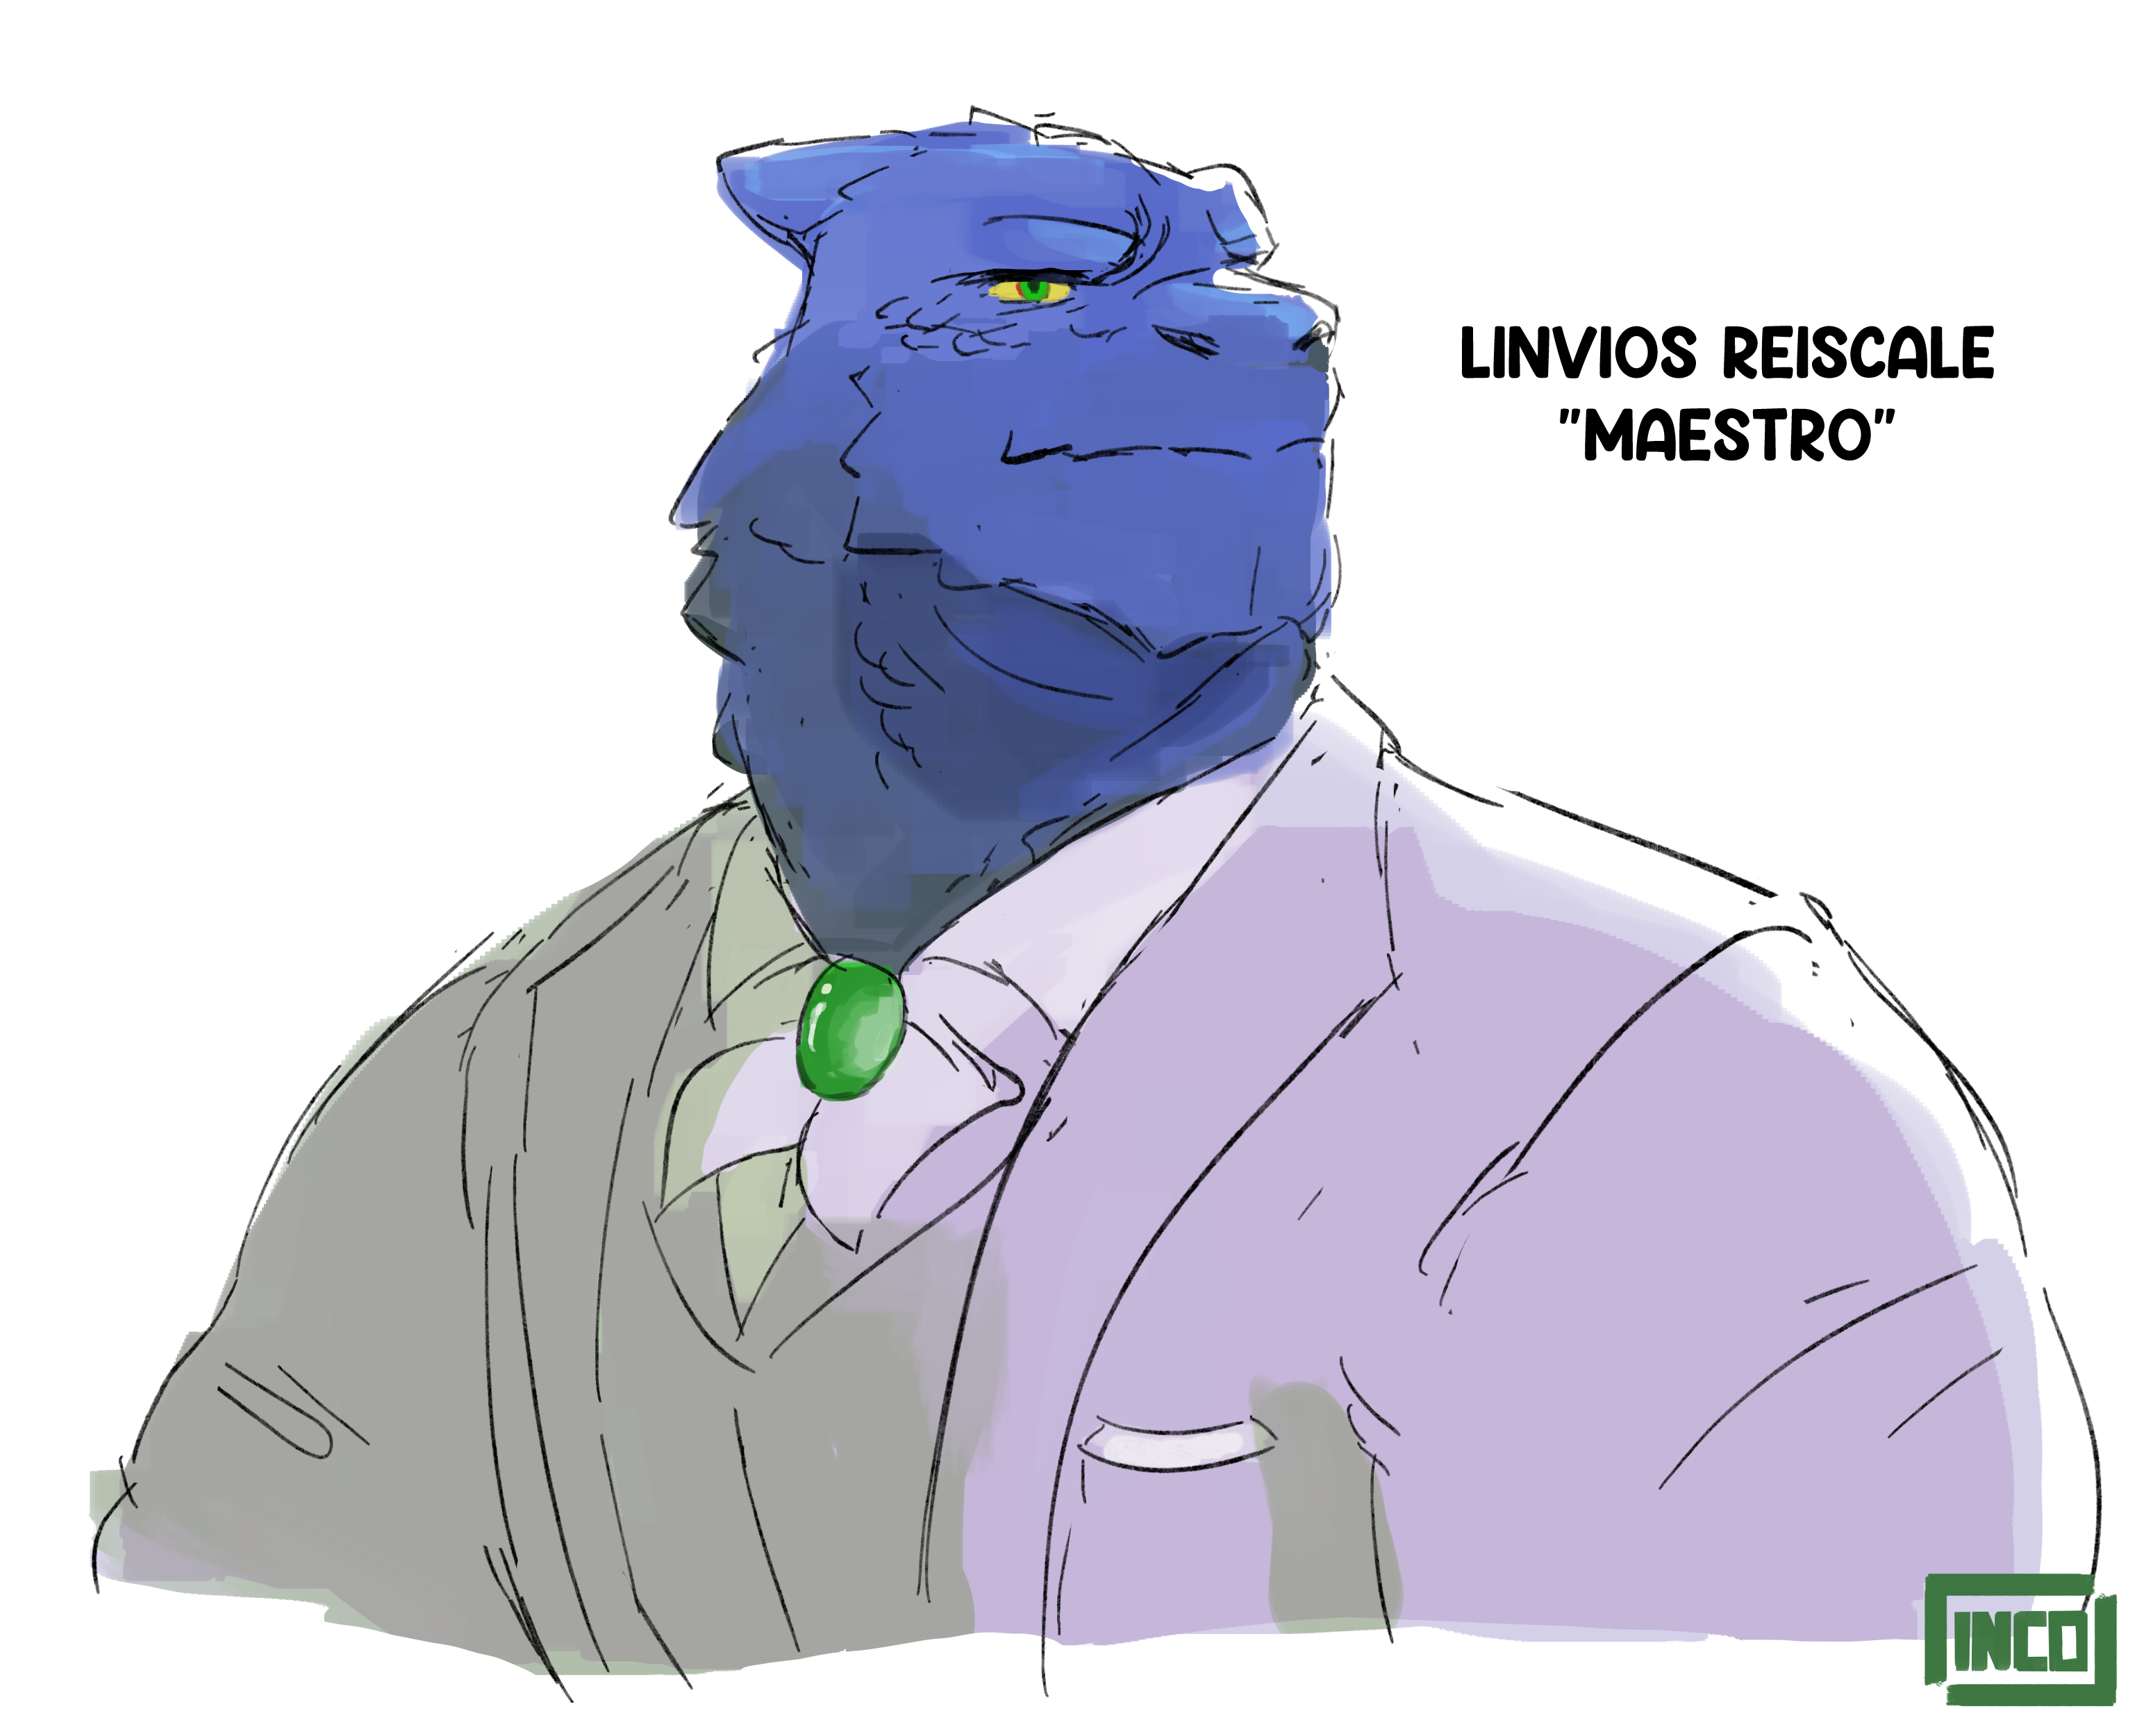 Linvios reiscale by Fiore.png